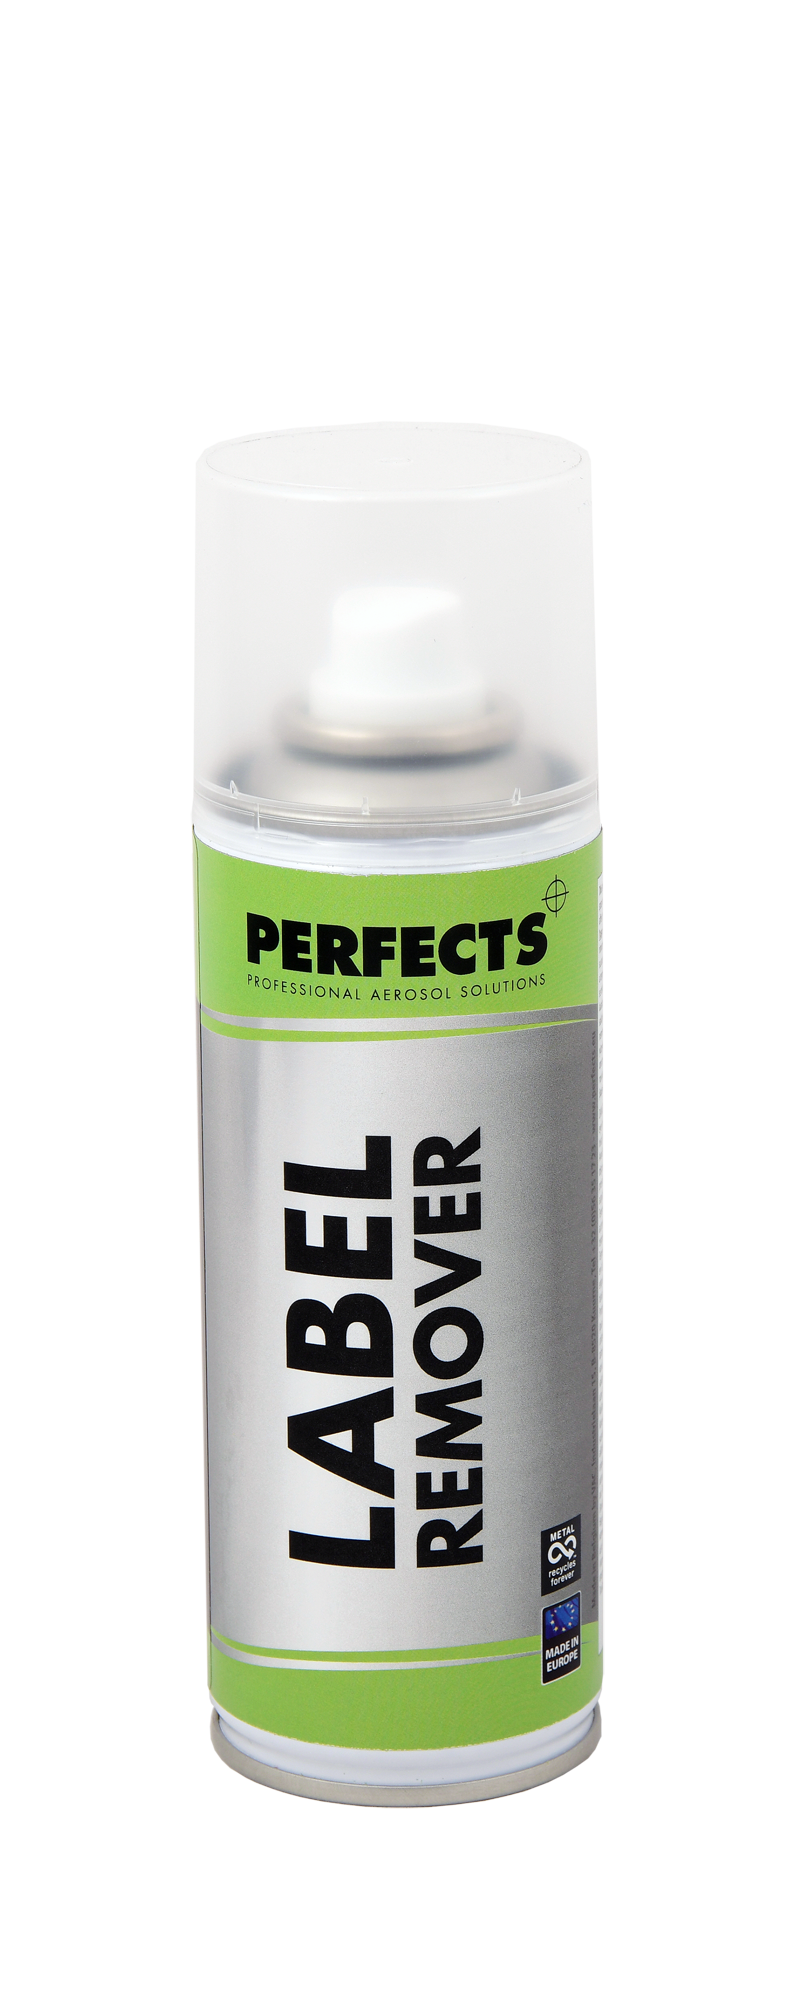 Label Remover Spray, Perfects